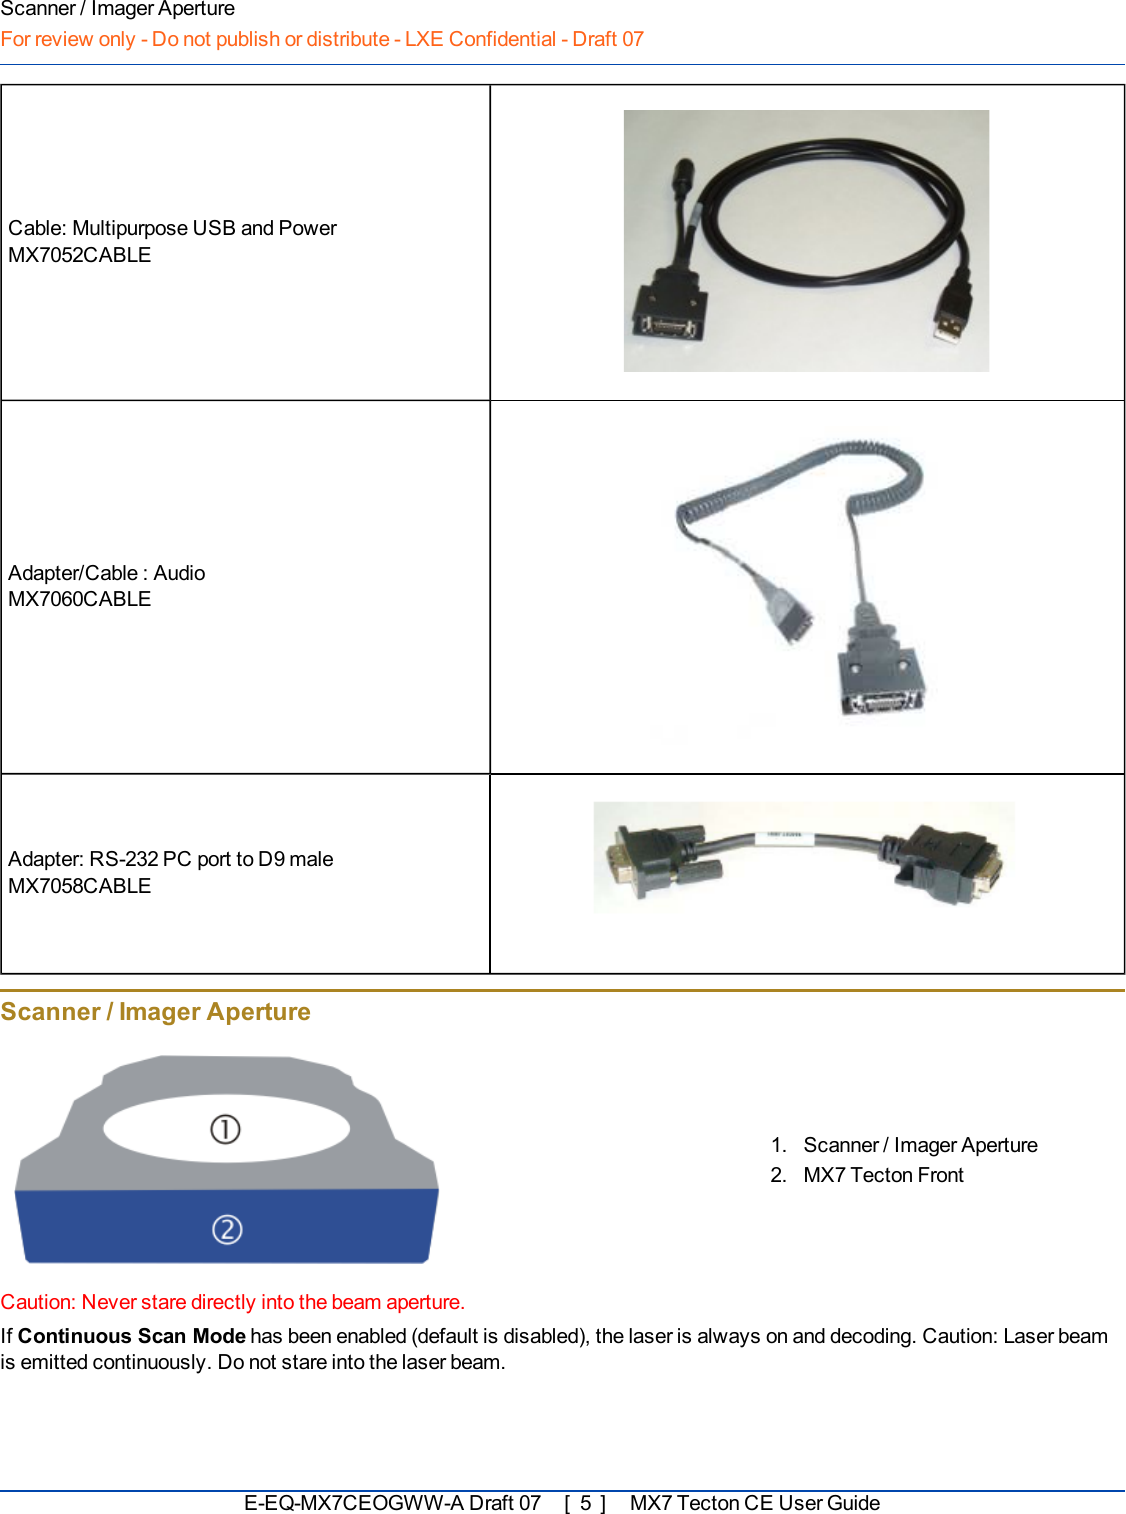 Scanner / Imager ApertureFor review only - Do not publish or distribute - LXE Confidential - Draft 07Cable: Multipurpose USB and PowerMX7052CABLEAdapter/Cable : AudioMX7060CABLEAdapter: RS-232 PC port to D9 maleMX7058CABLEScanner / Imager Aperture1. Scanner / Imager Aperture2. MX7 Tecton FrontCaution: Never stare directly into the beam aperture.If Continuous Scan Mode has been enabled (default is disabled), the laser is always on and decoding. Caution: Laser beamis emitted continuously. Do not stare into the laser beam.E-EQ-MX7CEOGWW-ADraft 07 [ 5 ] MX7 Tecton CE User Guide